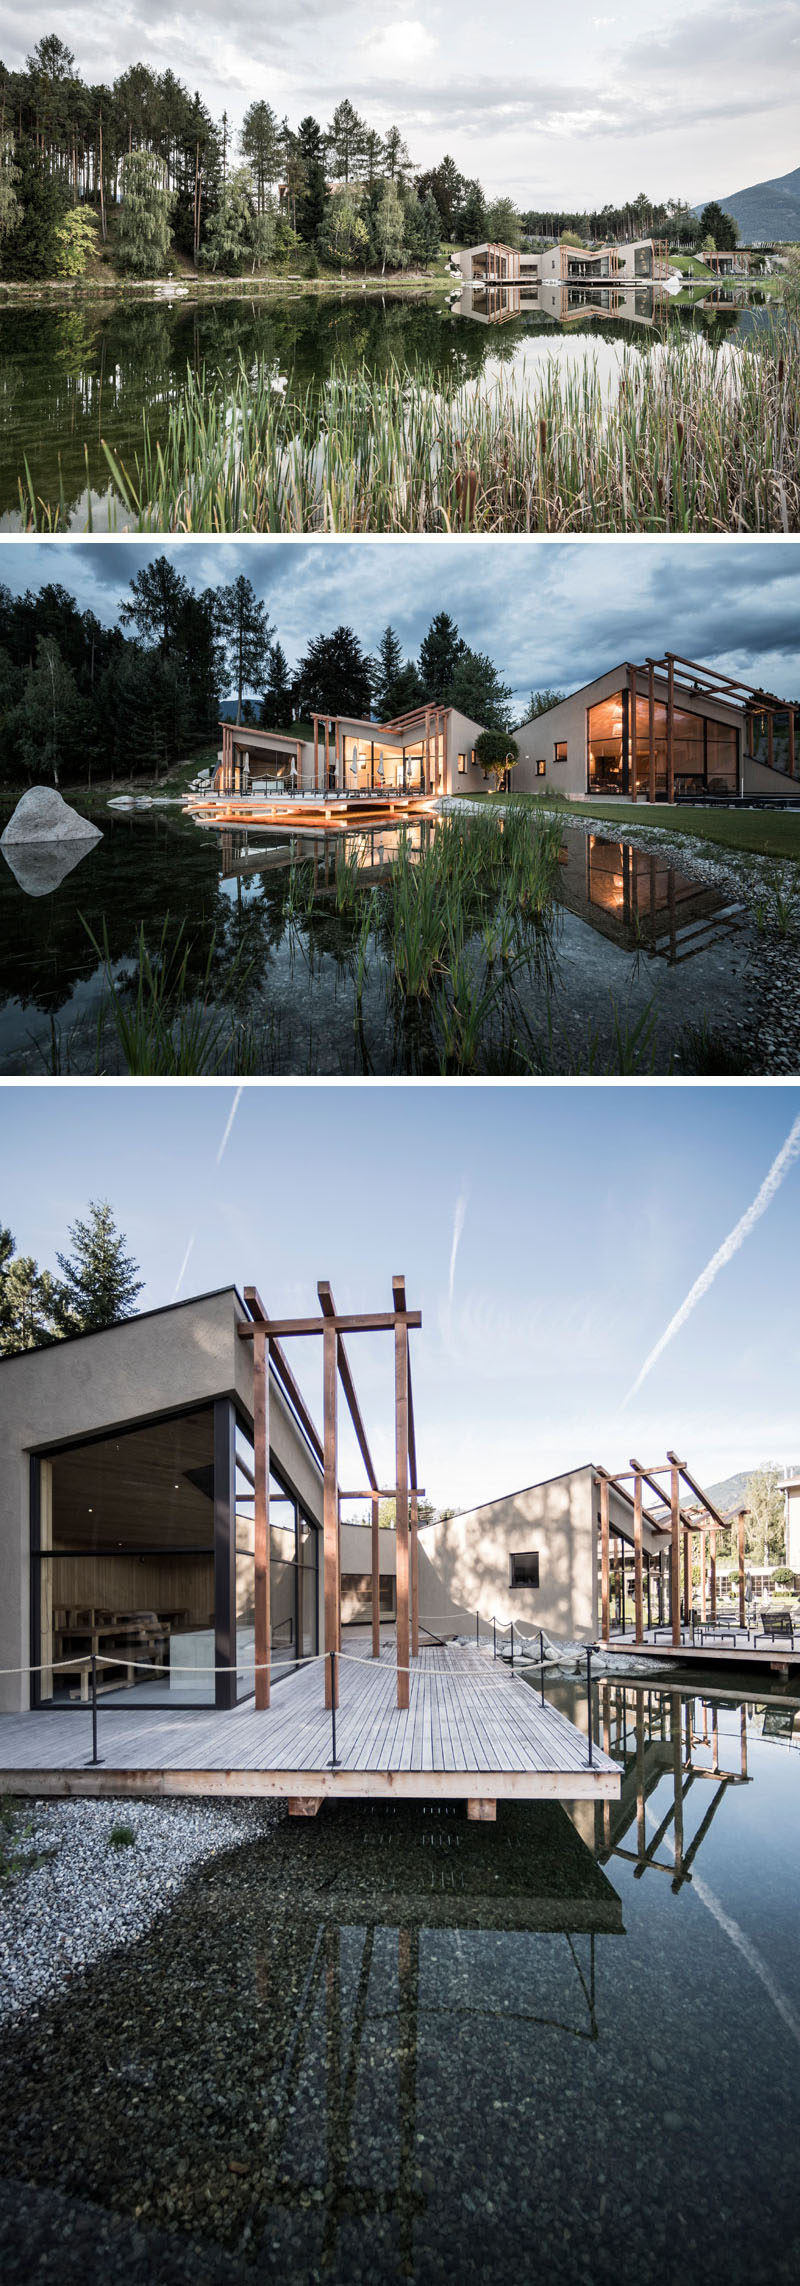 Hotel Seehof, a family-run hotel in Italy that sits next to a small natural lake, has been given a fresh and modern update by noa* – network of architecture. #ModernHotel #Italy #Vacation #ModernArchitecture